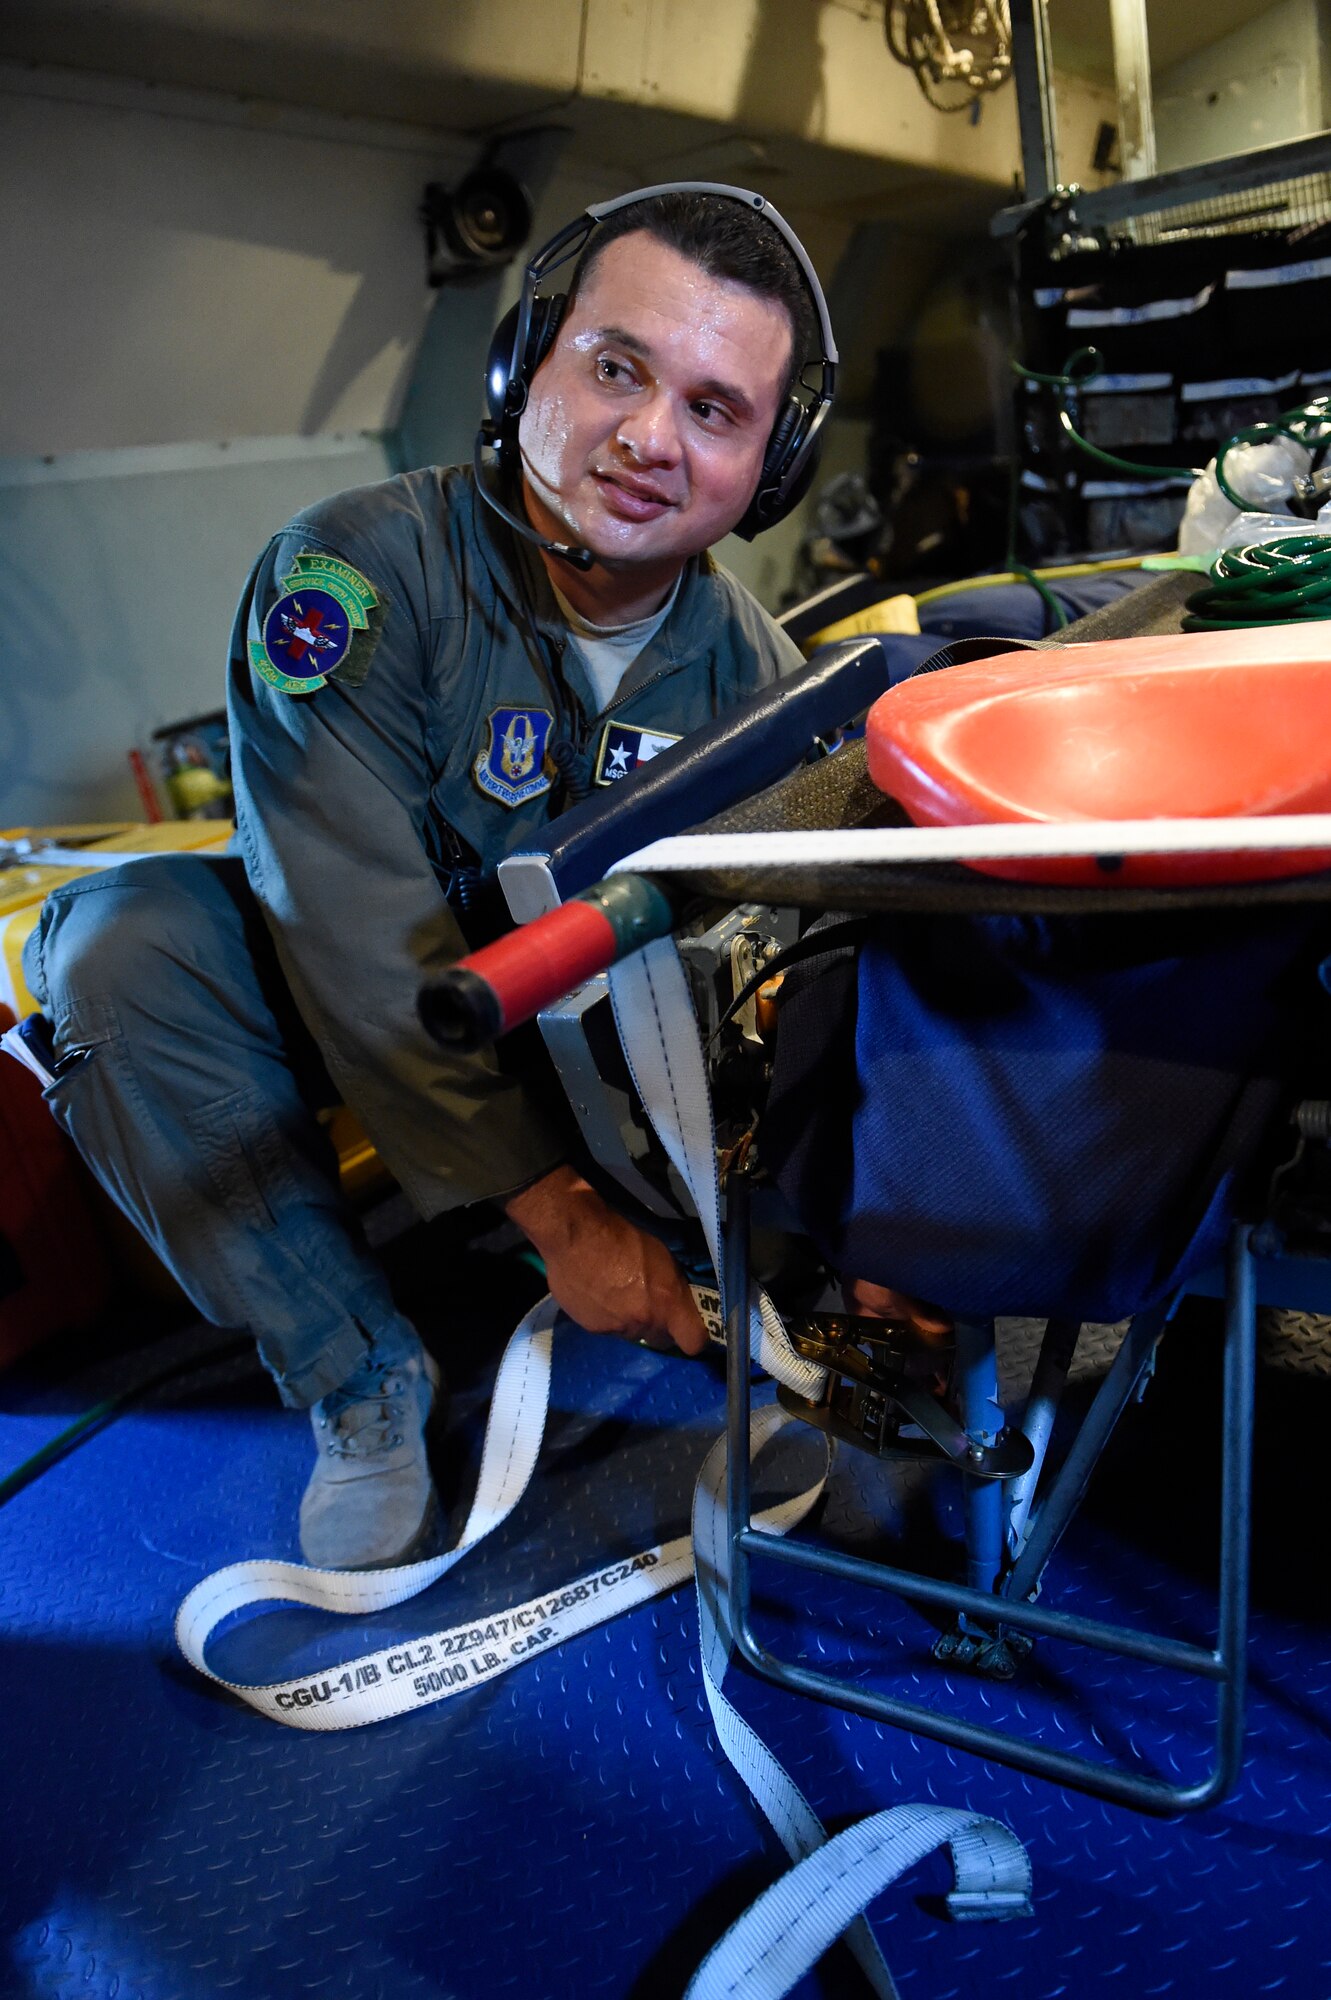 Master Sgt. Jerry Gonzales, 433rd Aeromedical Evacuation Squadron medical technician, fastens a litter for a medical scenario on-board a C-5A Galaxy Oct. 7, 2015 at Joint Base San Antonio-Lackland, Texas. Configuring a C-5 to meet their needs, the 433rd AES members established and met requirements to conduct air reserve missions while maintaining the focus on the patient, significantly improving the efficiency and effectiveness of safe and responsive patients globally. (U.S. Air Force photo by Senior Airman Keith James/Released)